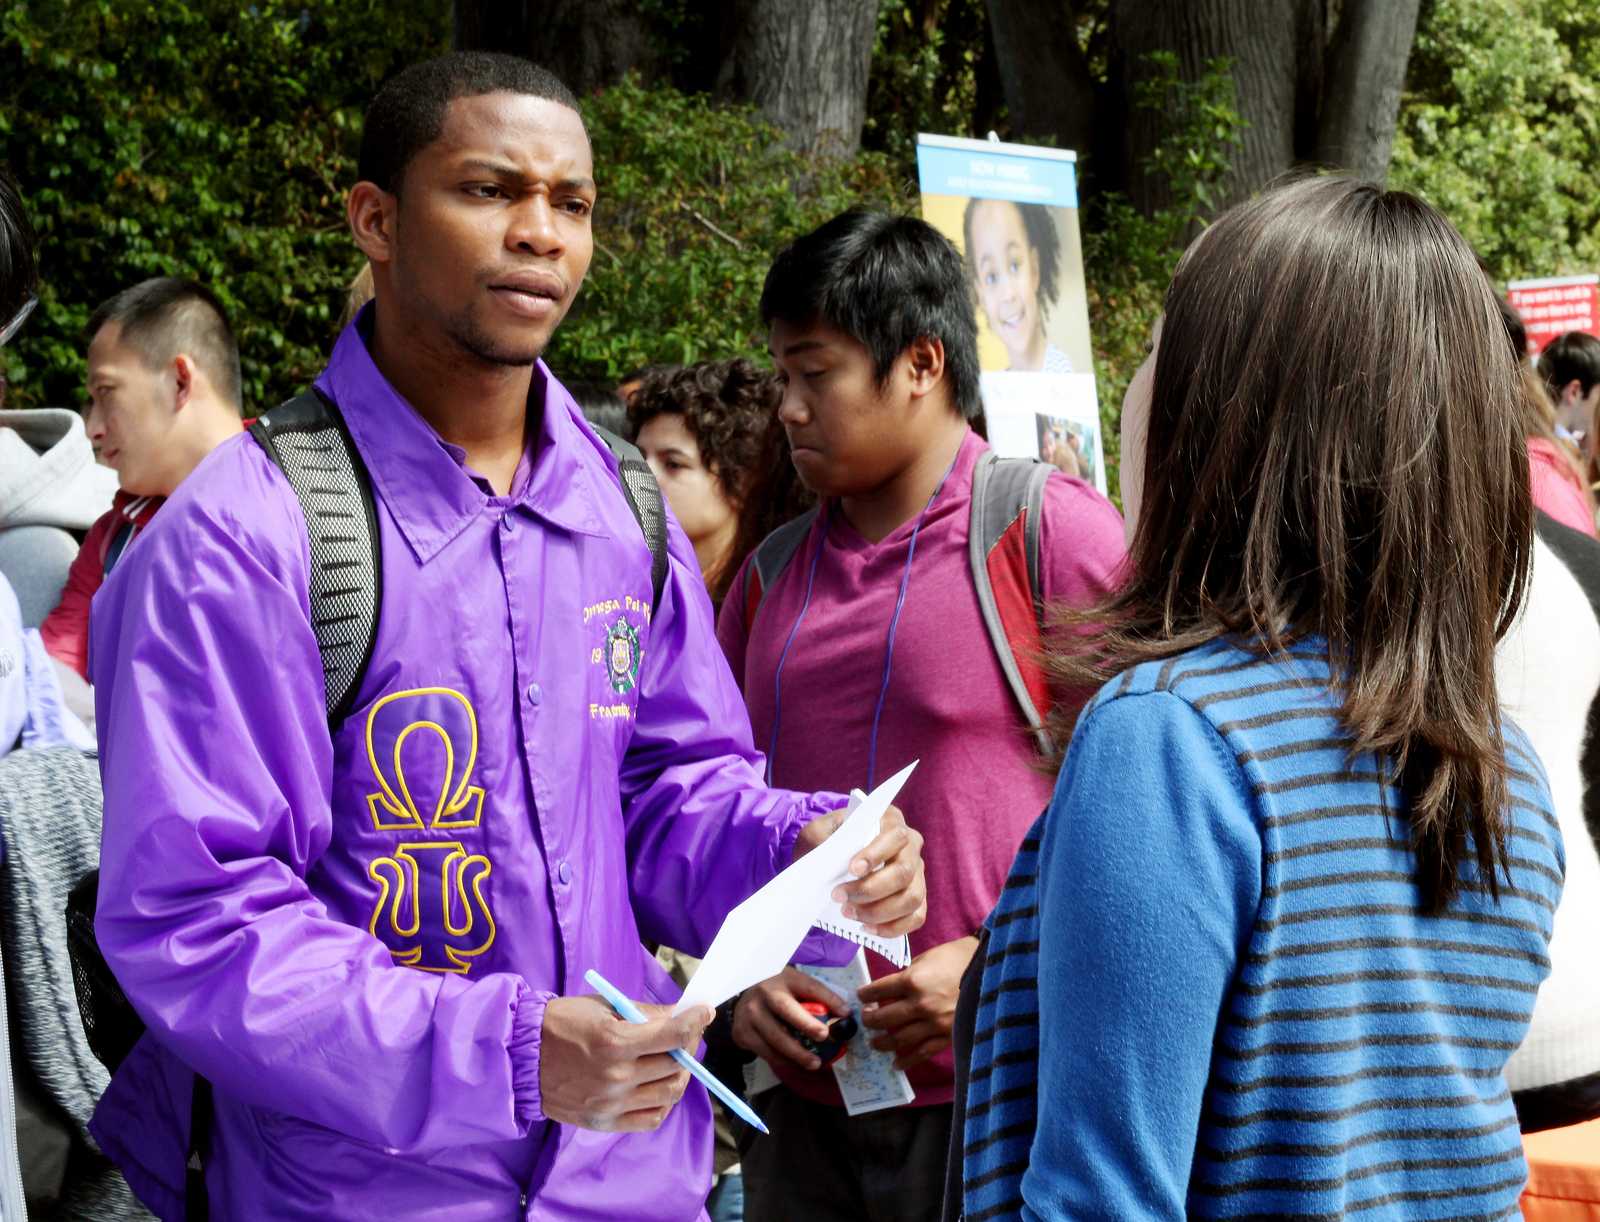 Shawn McGriff (left), a Liberal Studies major, speaks to Zoila Baltodano, the business office manager at Cesar Chavez Student Center, at a Part-Time Job Fair held in the quad at SF State, on Sept. 12, 2013. The event was put together by the Student Involvement and Career Center as a for students to meet on and off campus employers offering part-time positions. Photo by Gavin McIntyre / Xpress